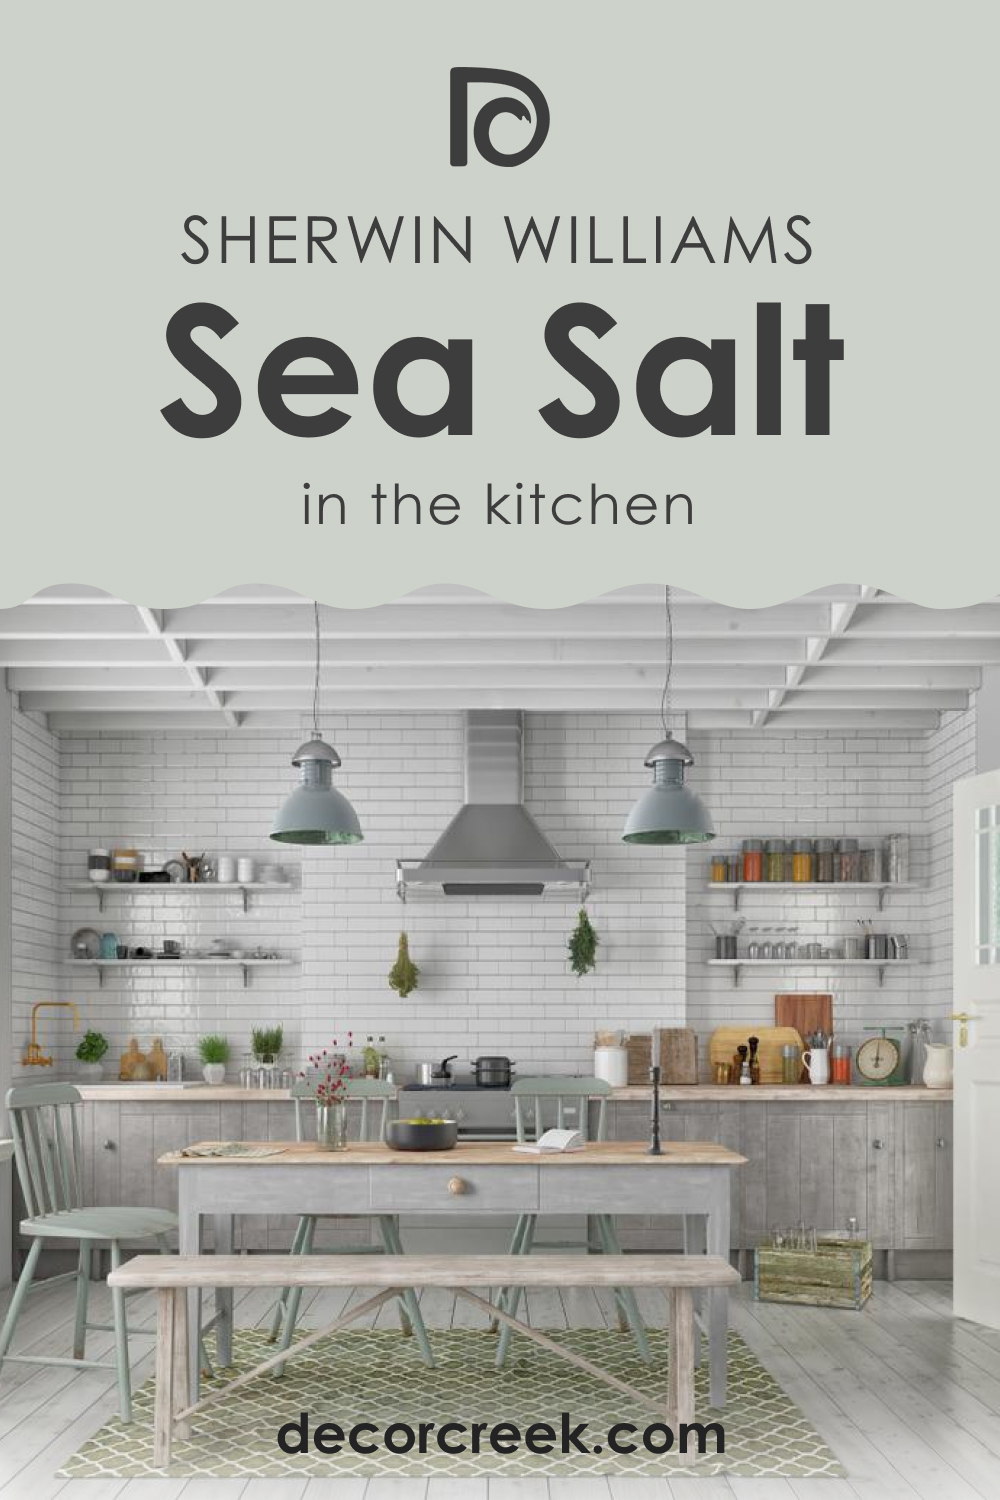 How to Use Sea Salt SW 6204 for the Kitchen?